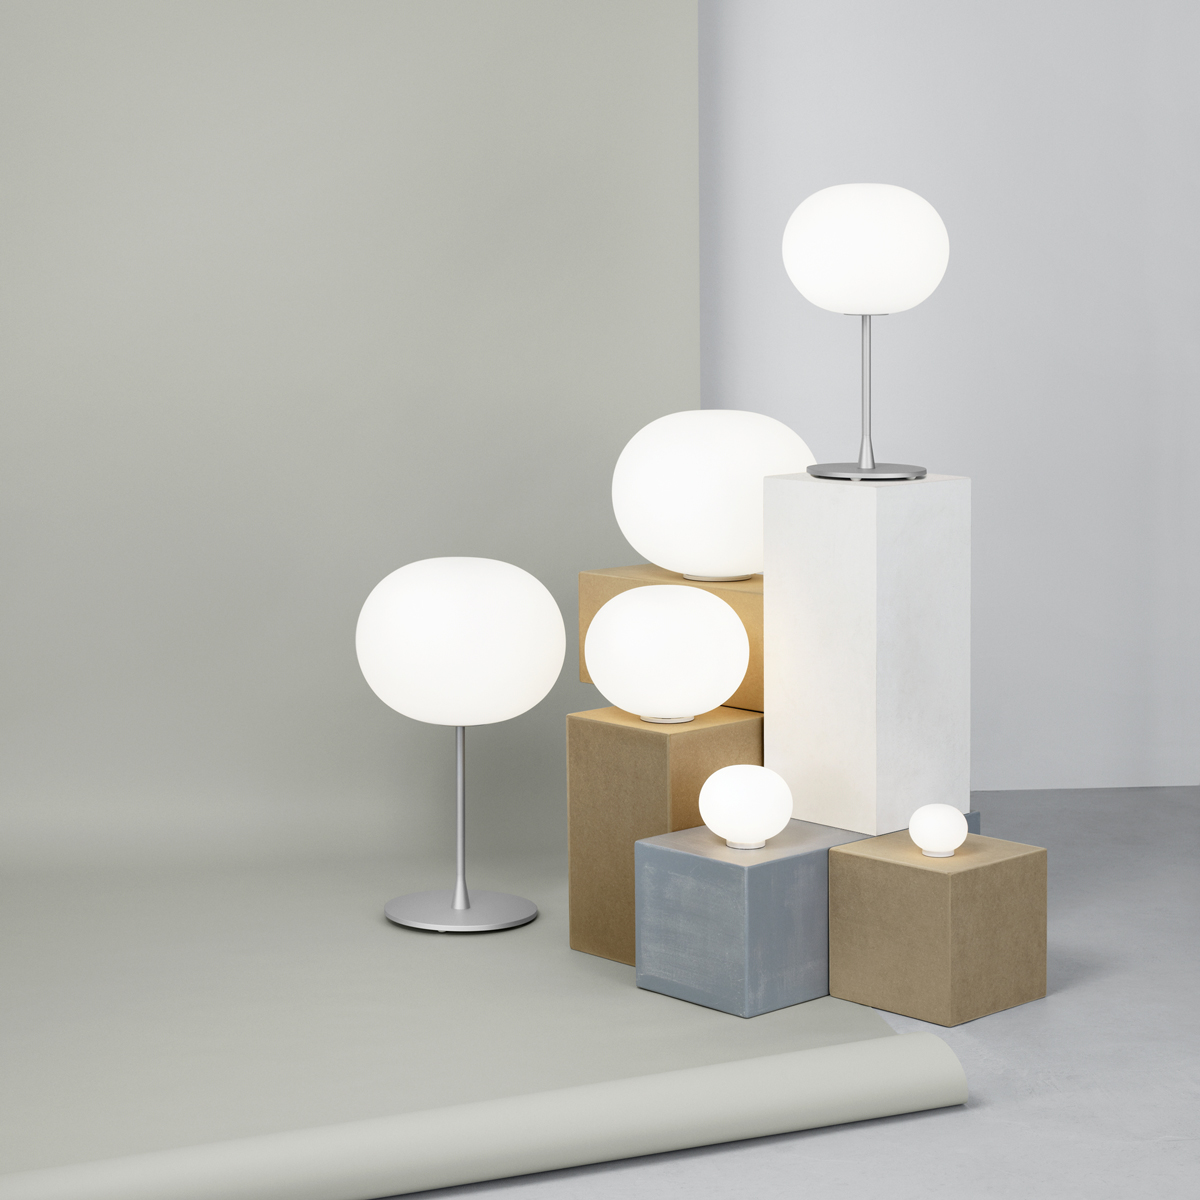 Glo-Ball Series by FLOS